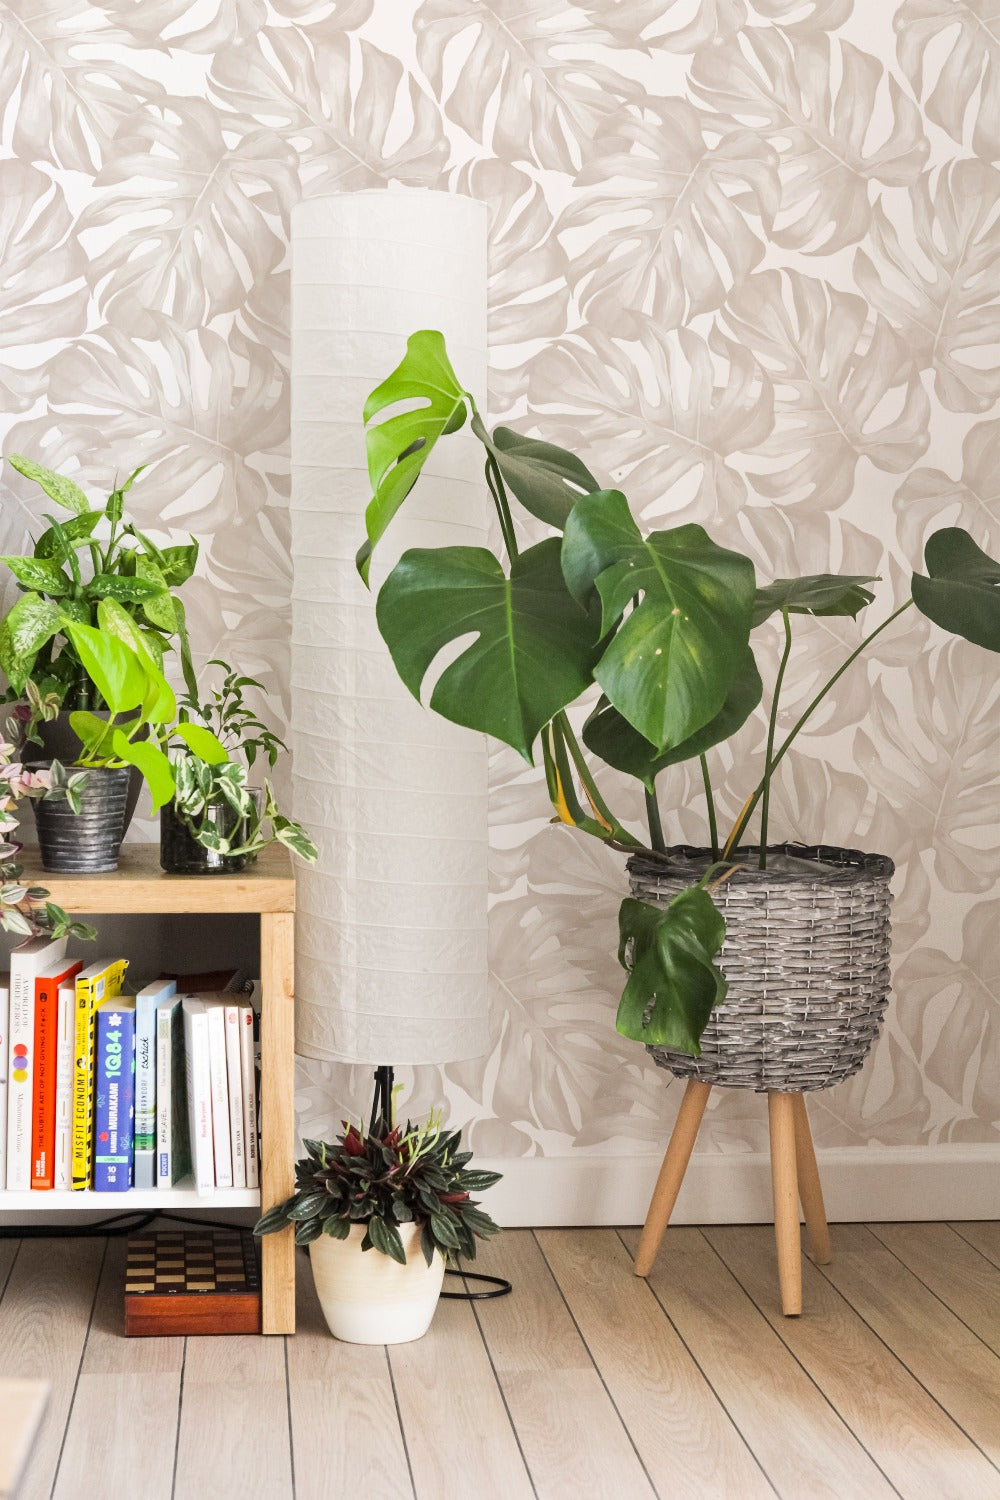 A vertical image displaying a cozy room corner with a wooden bookshelf full of books and a collection of vibrant indoor plants. A large monstera is situated in a wicker basket stand against the backdrop of a white wallpaper featuring a monstera leaf design in a soft, watercolor-like style.